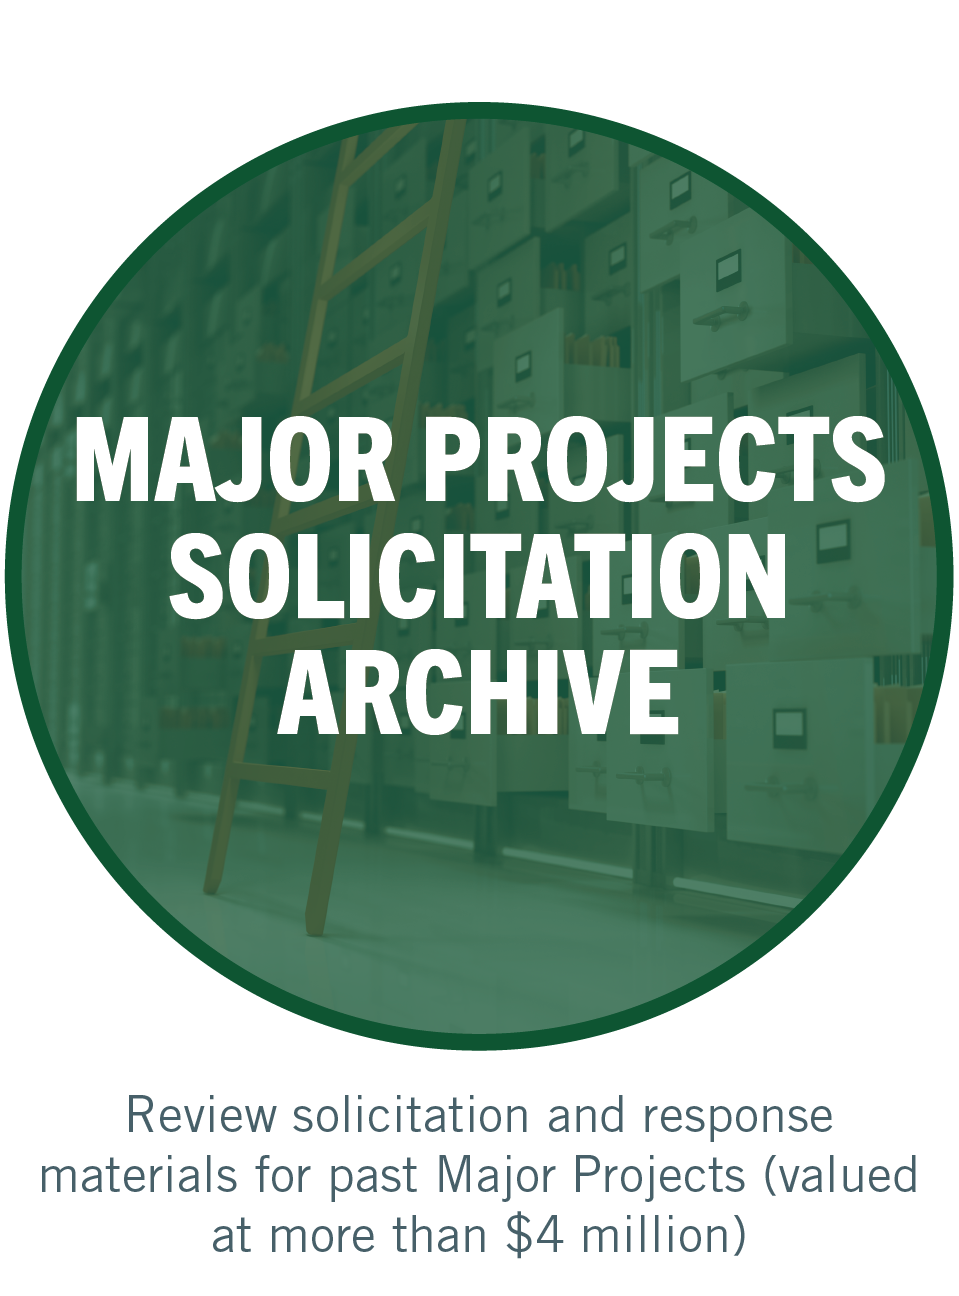 Major Projects Solicitation Archive